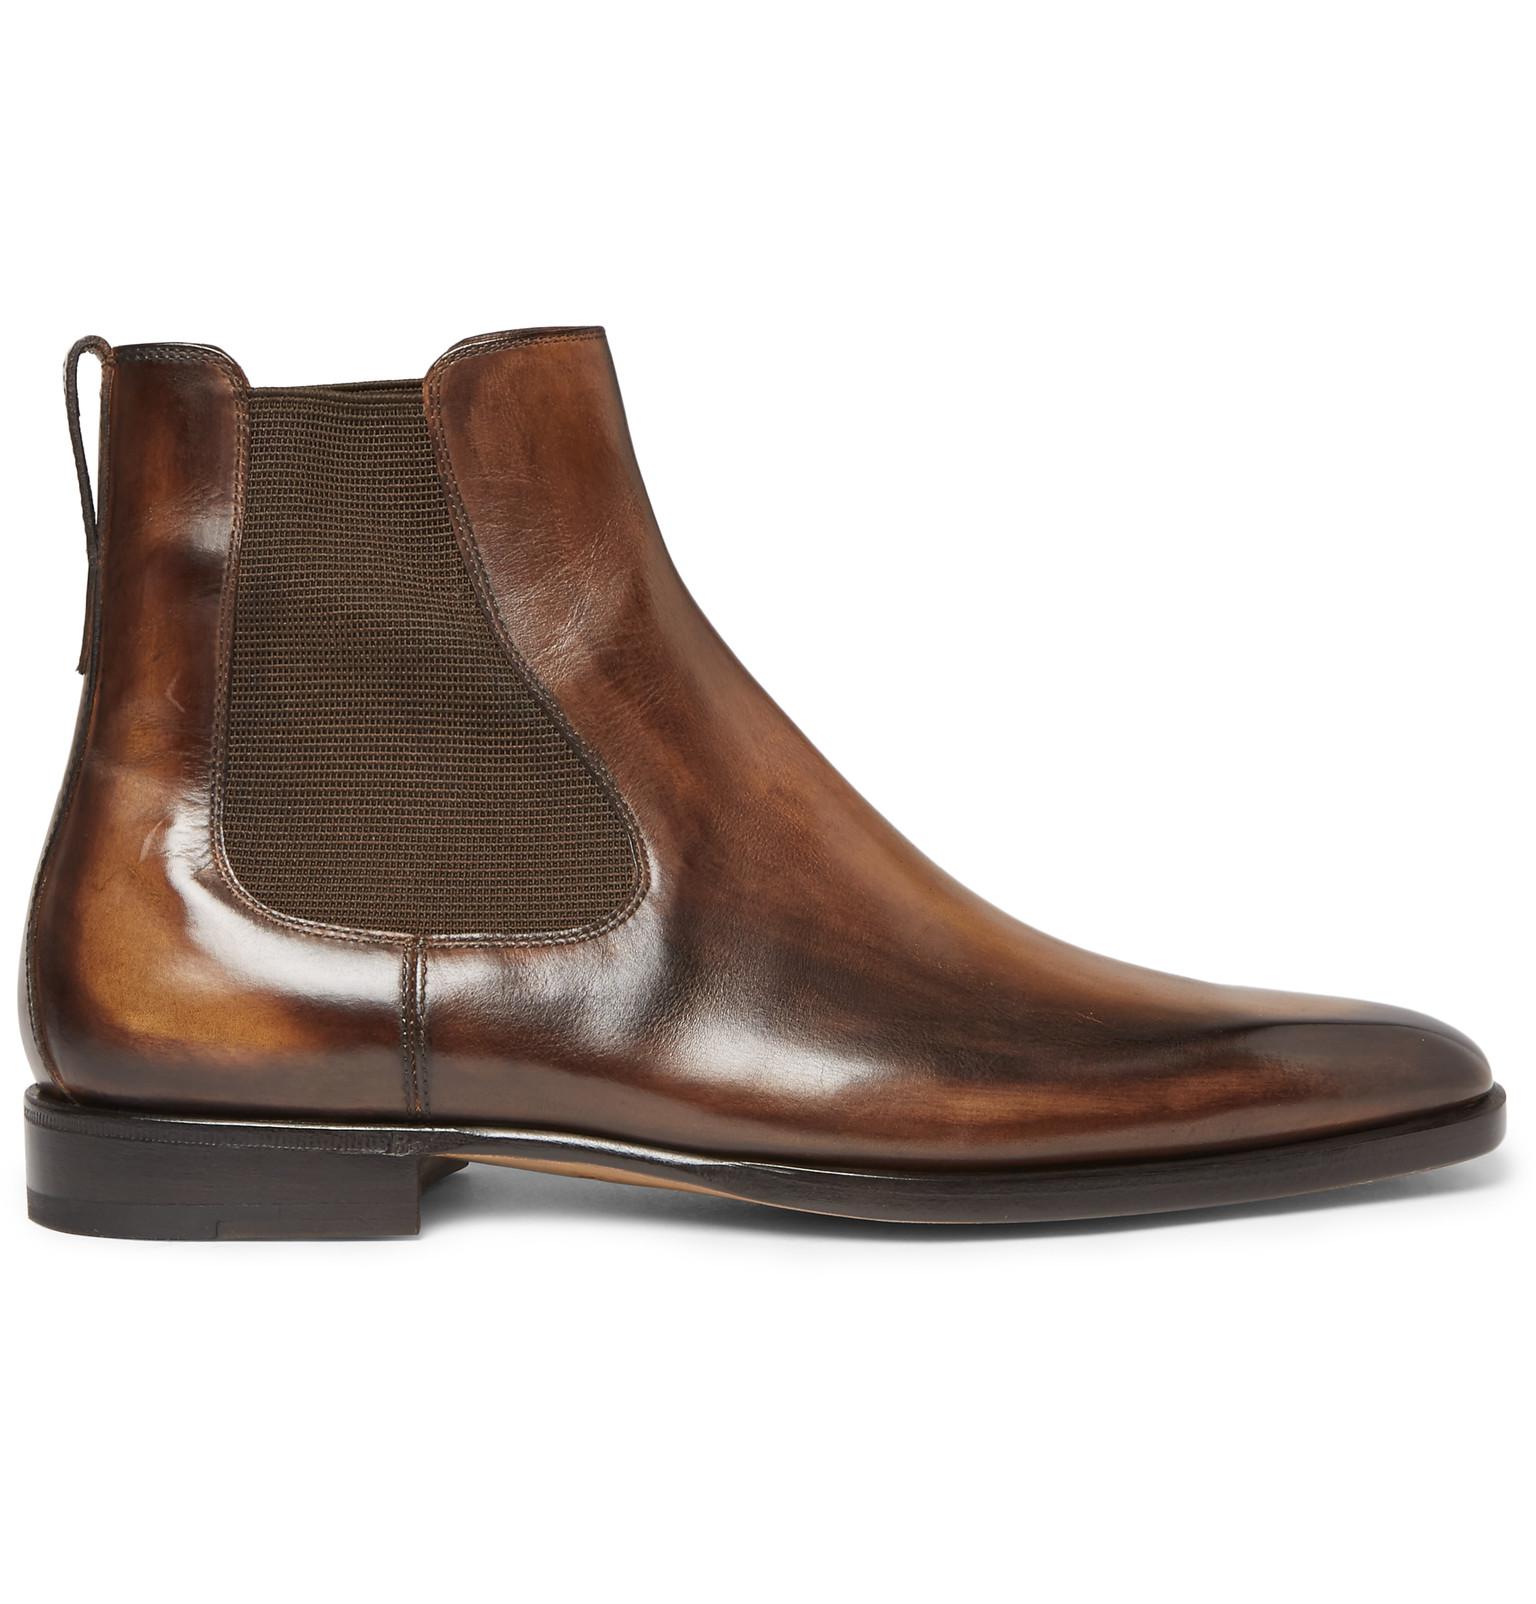 Berluti Leather Chelsea Boots in Brown for Men - Lyst